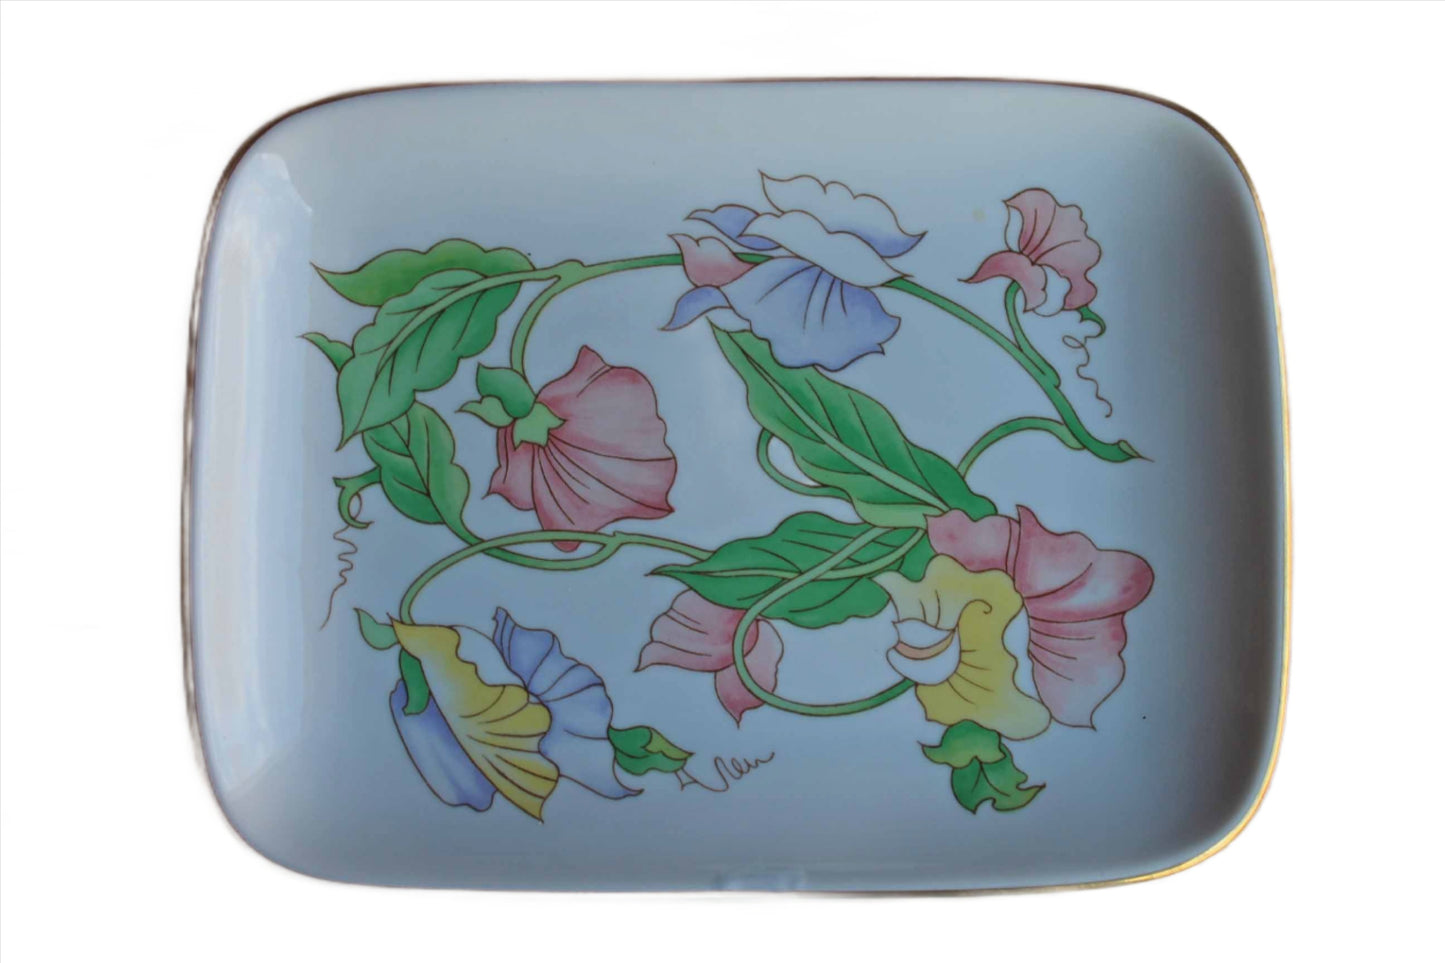 Ben Rickert, Inc. (Made in Japan) Small Porcelain Tray with Colorful Flowers